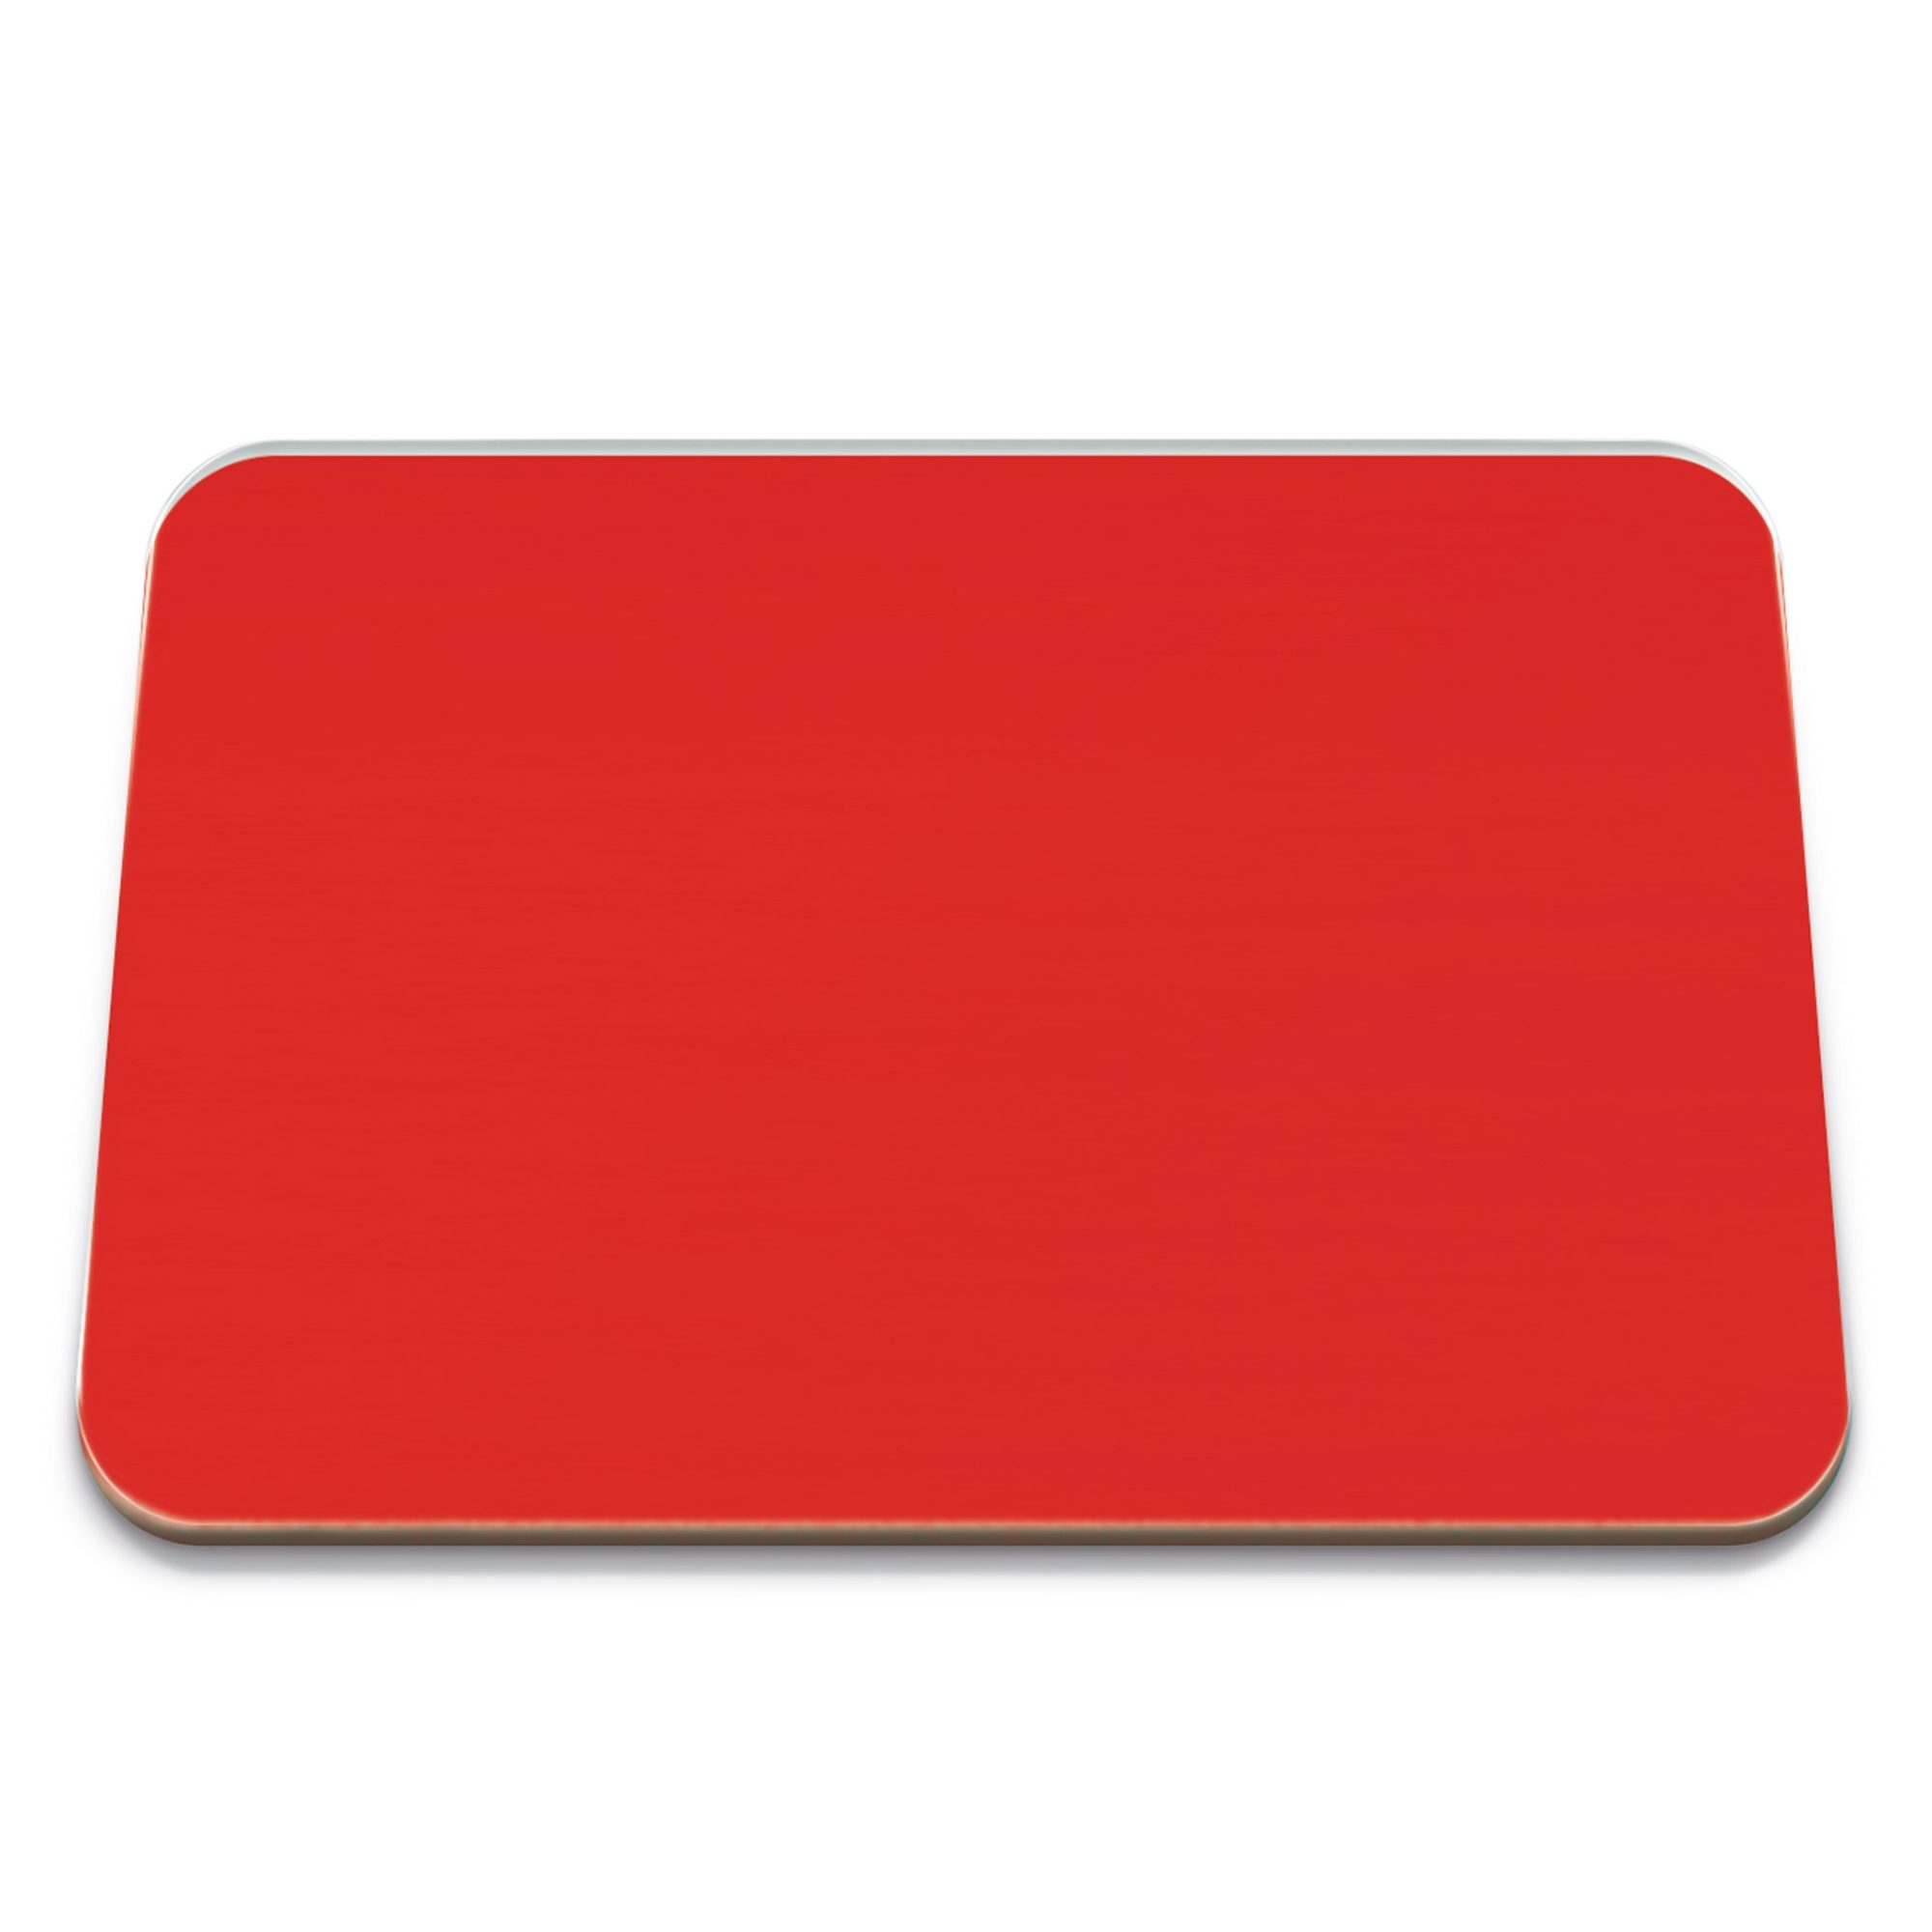 RED GLASS BOARD LARGE 40x50CM